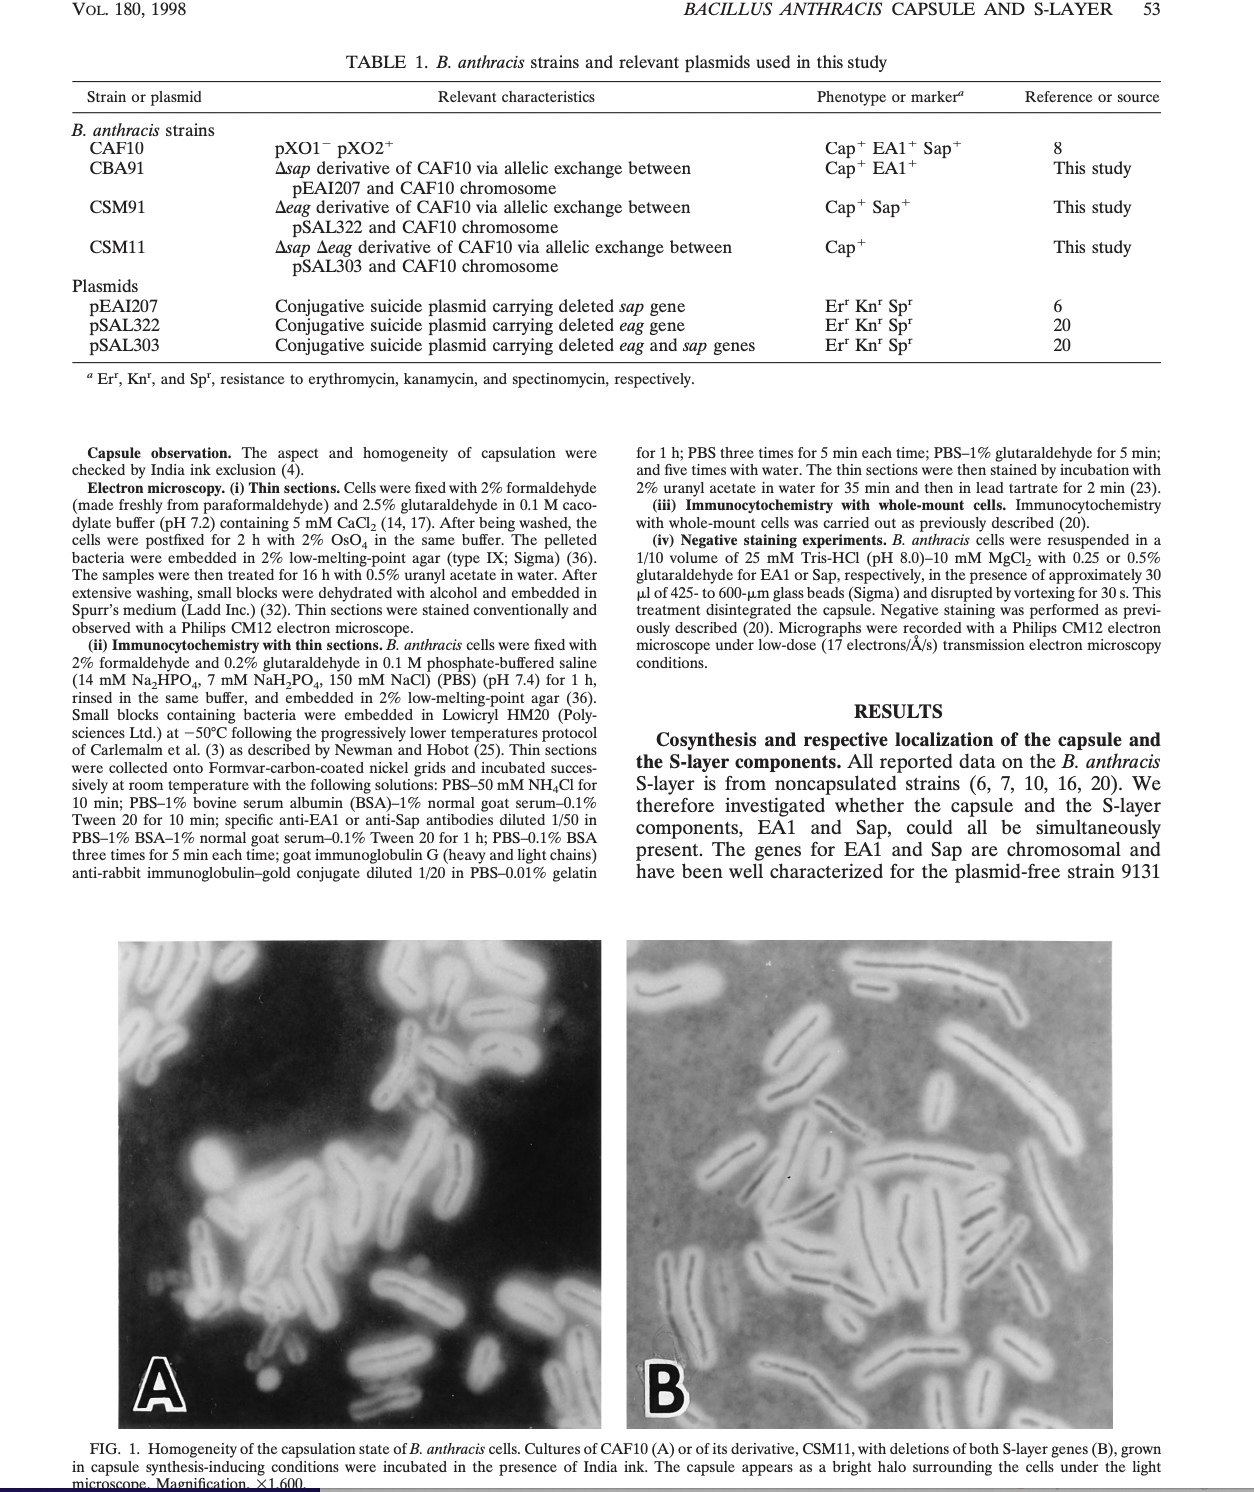 VOL. 180, 1998
Strain or plasmid
B. anthracis strains
CAF10
CBA91
CSM91
CSM11
Plasmids
PEAI207
PSAL322
pSAL303
TABLE 1. B. anthracis strains and relevant plasmids used in this study
Relevant characteristics.
pX01 PXO2+
Asap derivative of CAF10 via allelic exchange between
PEAI207 and CAF10 chromosome
Aeag derivative of CAF10 via allelic exchange between
pSAL322 and CAF10 chromosome
Asap Aeag derivative of CAF10 via allelic exchange between
pSAL303 and CAF10 chromosome
Conjugative suicide plasmid carrying deleted sap gene
Conjugative suicide plasmid carrying deleted eag gene
Conjugative suicide plasmid carrying deleted eag and sap genes
"Er', Kn', and Sp', resistance to erythromycin, kanamycin, and spectinomycin, respectively.
BACILLUS ANTHRACIS CAPSULE AND S-LAYER 53
Capsule observation. The aspect and homogeneity of capsulation were
checked by India ink exclusion (4).
Electron microscopy. (i) Thin sections. Cells were fixed with 2% formaldehyde
(made freshly from paraformaldehyde) and 2.5% glutaraldehyde in 0.1 M caco-
dylate buffer (pH 7.2) containing 5 mM CaCl₂ (14, 17). After being washed, the
cells were postfixed for 2 h with 2% OsO4 in the same buffer. The pelleted
bacteria were embedded in 2% low-melting-point agar (type IX; Sigma) (36).
The samples were then treated for 16 h with 0.5% uranyl acetate in water. After
extensive washing, small blocks were dehydrated with alcohol and embedded in
Spurr's medium (Ladd Inc.) (32). Thin sections were stained conventionally and
observed with a Philips CM12 electron microscope.
(ii) Immunocytochemistry with thin sections. B. anthracis cells were fixed with
2% formaldehyde and 0.2% glutaraldehyde in 0.1 M phosphate-buffered saline
(14 mM Na₂HPO4, 7 mM NaH₂PO4, 150 mM NaCl) (PBS) (pH 7.4) for 1 h,
rinsed in the same buffer, and embedded in 2% low-melting-point agar (36).
Small blocks containing bacteria were embedded in Lowicryl HM20 (Poly-
sciences Ltd.) at -50°C following the progressively lower temperatures protocol
of Carlemalm et al. (3) as described by Newman and Hobot (25). Thin sections
were collected onto Formvar-carbon-coated nickel grids and incubated succes-
sively at room temperature with the following solutions: PBS-50 mM NH4Cl for
10 min; PBS-1% bovine serum albumin (BSA) -1% normal goat serum-0.1%
Tween 20 for 10 min; specific anti-EA1 or anti-Sap antibodies diluted 1/50 in
PBS-1% BSA-1% normal goat serum-0.1% Tween 20 for 1 h; PBS-0.1% BSA
three times for 5 min each time; goat immunoglobulin G (heavy and light chains)
anti-rabbit immunoglobulin-gold conjugate diluted 1/20 in PBS-0.01% gelatin
Phenotype or markerª
Cap EA1+ Sap*
Cap+ EA1+
Cap+ Sap+
Cap+
Er' Kn¹ Sp¹
Er Kn¹ Sp
Er Kn¹ Sp¹
Reference or source
RESULTS
8
This study
This study
This study
6
20
20
for 1 h; PBS three times for 5 min each time; PBS-1% glutaraldehyde for 5 min;
and five times with water. The thin sections were then stained by incubation with
2% uranyl acetate in water for 35 min and then in lead tartrate for 2 min (23).
(iii) Immunocytochemistry with whole-mount cells. Immunocytochemistry
with whole-mount cells was carried out as previously described (20).
(iv) Negative staining experiments. B. anthracis cells were resuspended in a
1/10 volume of 25 mM Tris-HCl (pH 8.0)-10 mM MgCl₂ with 0.25 or 0.5%
glutaraldehyde for EA1 or Sap, respectively, in the presence of approximately 30
μl of 425- to 600-µm glass beads (Sigma) and disrupted by vortexing for 30 s. This
treatment disintegrated the capsule. Negative staining was performed as previ-
ously described (20). Micrographs were recorded with a Philips CM12 electron
microscope under low-dose (17 electrons/Å/s) transmission electron microscopy
conditions.
Cosynthesis and respective localization of the capsule and
the S-layer components. All reported data on the B. anthracis
S-layer is from noncapsulated strains (6, 7, 10, 16, 20). We
therefore investigated whether the capsule and the S-layer
components, EA1 and Sap, could all be simultaneously
present. The genes for EA1 and Sap are chromosomal and
have been well characterized for the plasmid-free strain 9131
A
B
FIG. 1. Homogeneity of the capsulation state of B. anthracis cells. Cultures of CAF10 (A) or of its derivative, CSM11, with deletions of both S-layer genes (B), grown
in capsule synthesis-inducing conditions were incubated in the presence of India ink. The capsule appears as a bright halo surrounding the cells under the light
microscone. Magnification. X1.600.